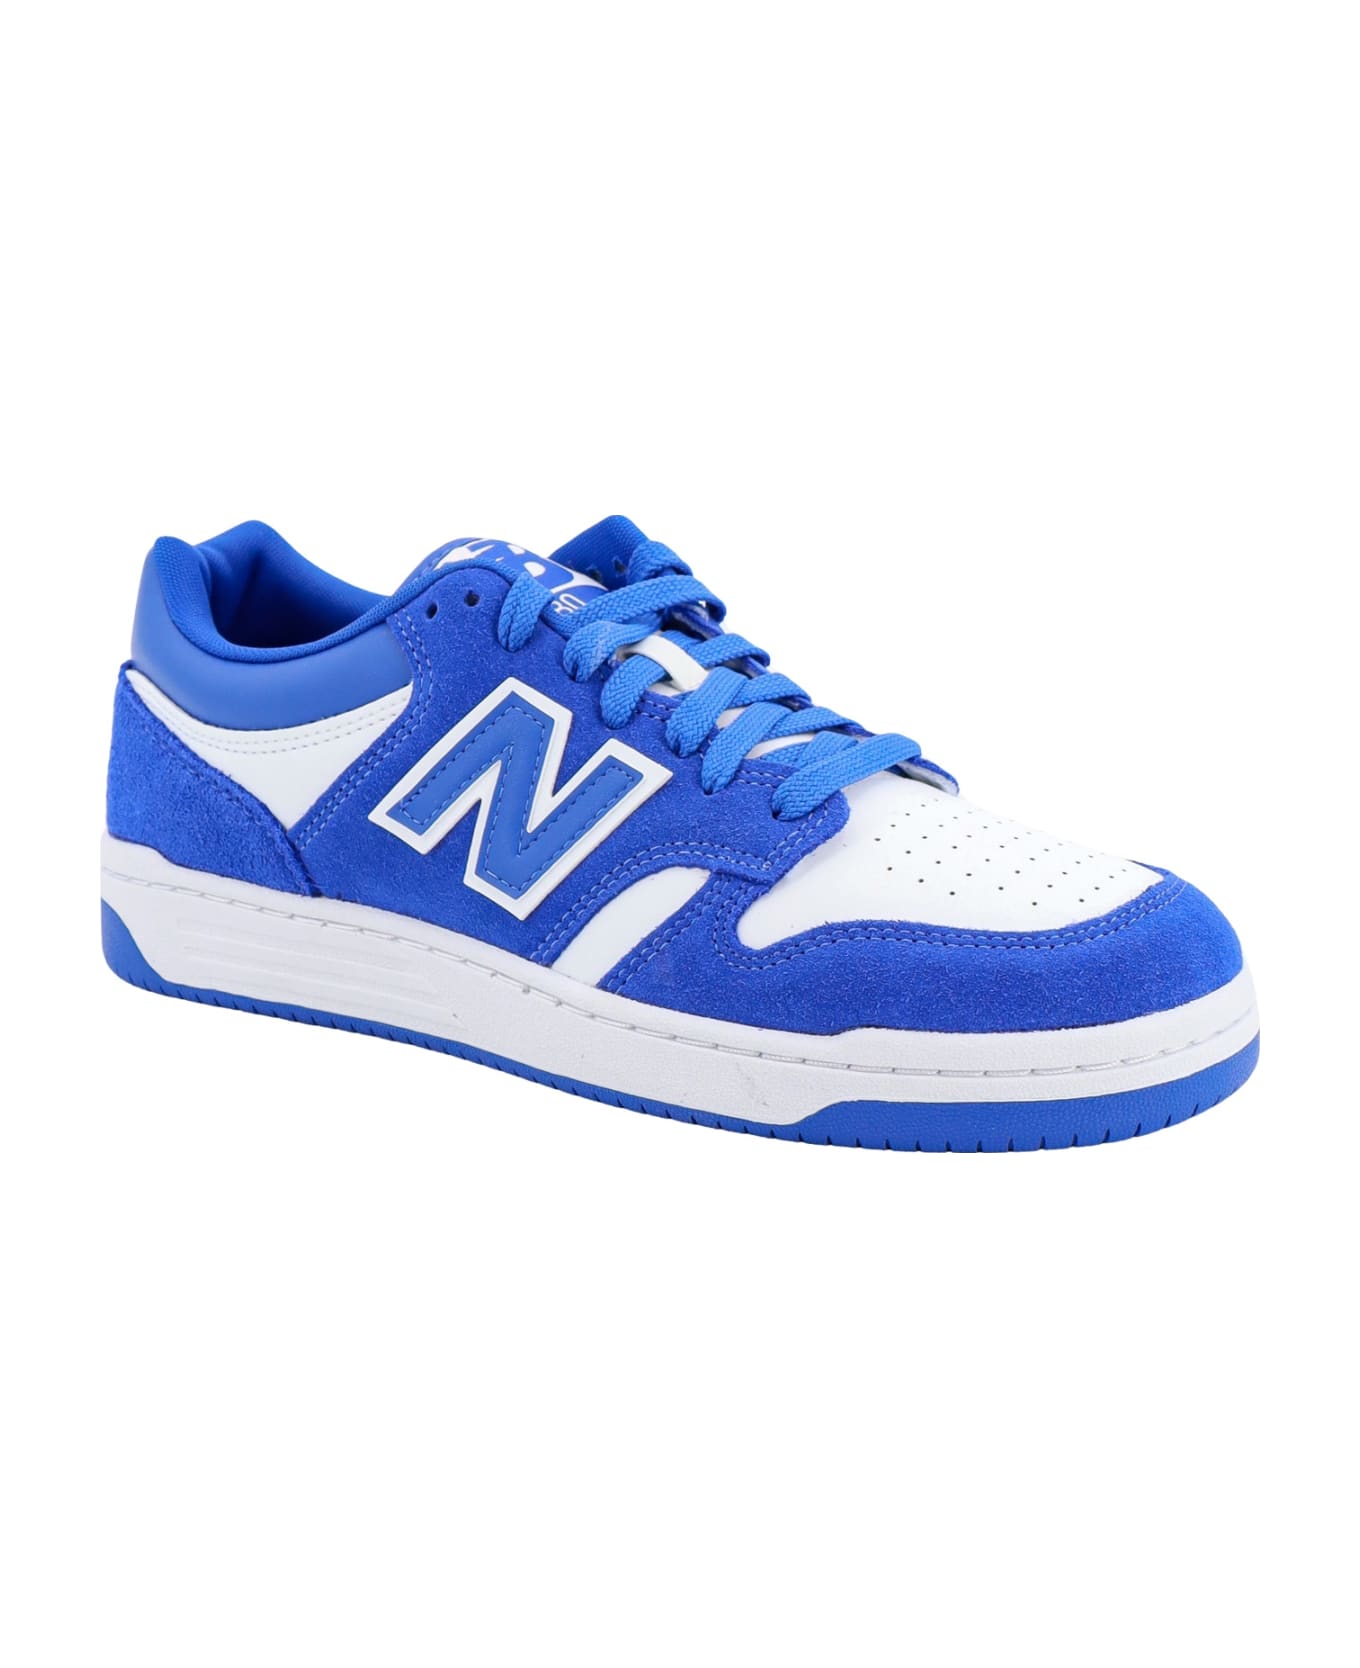 New Balance 480 Sneakers - Blue